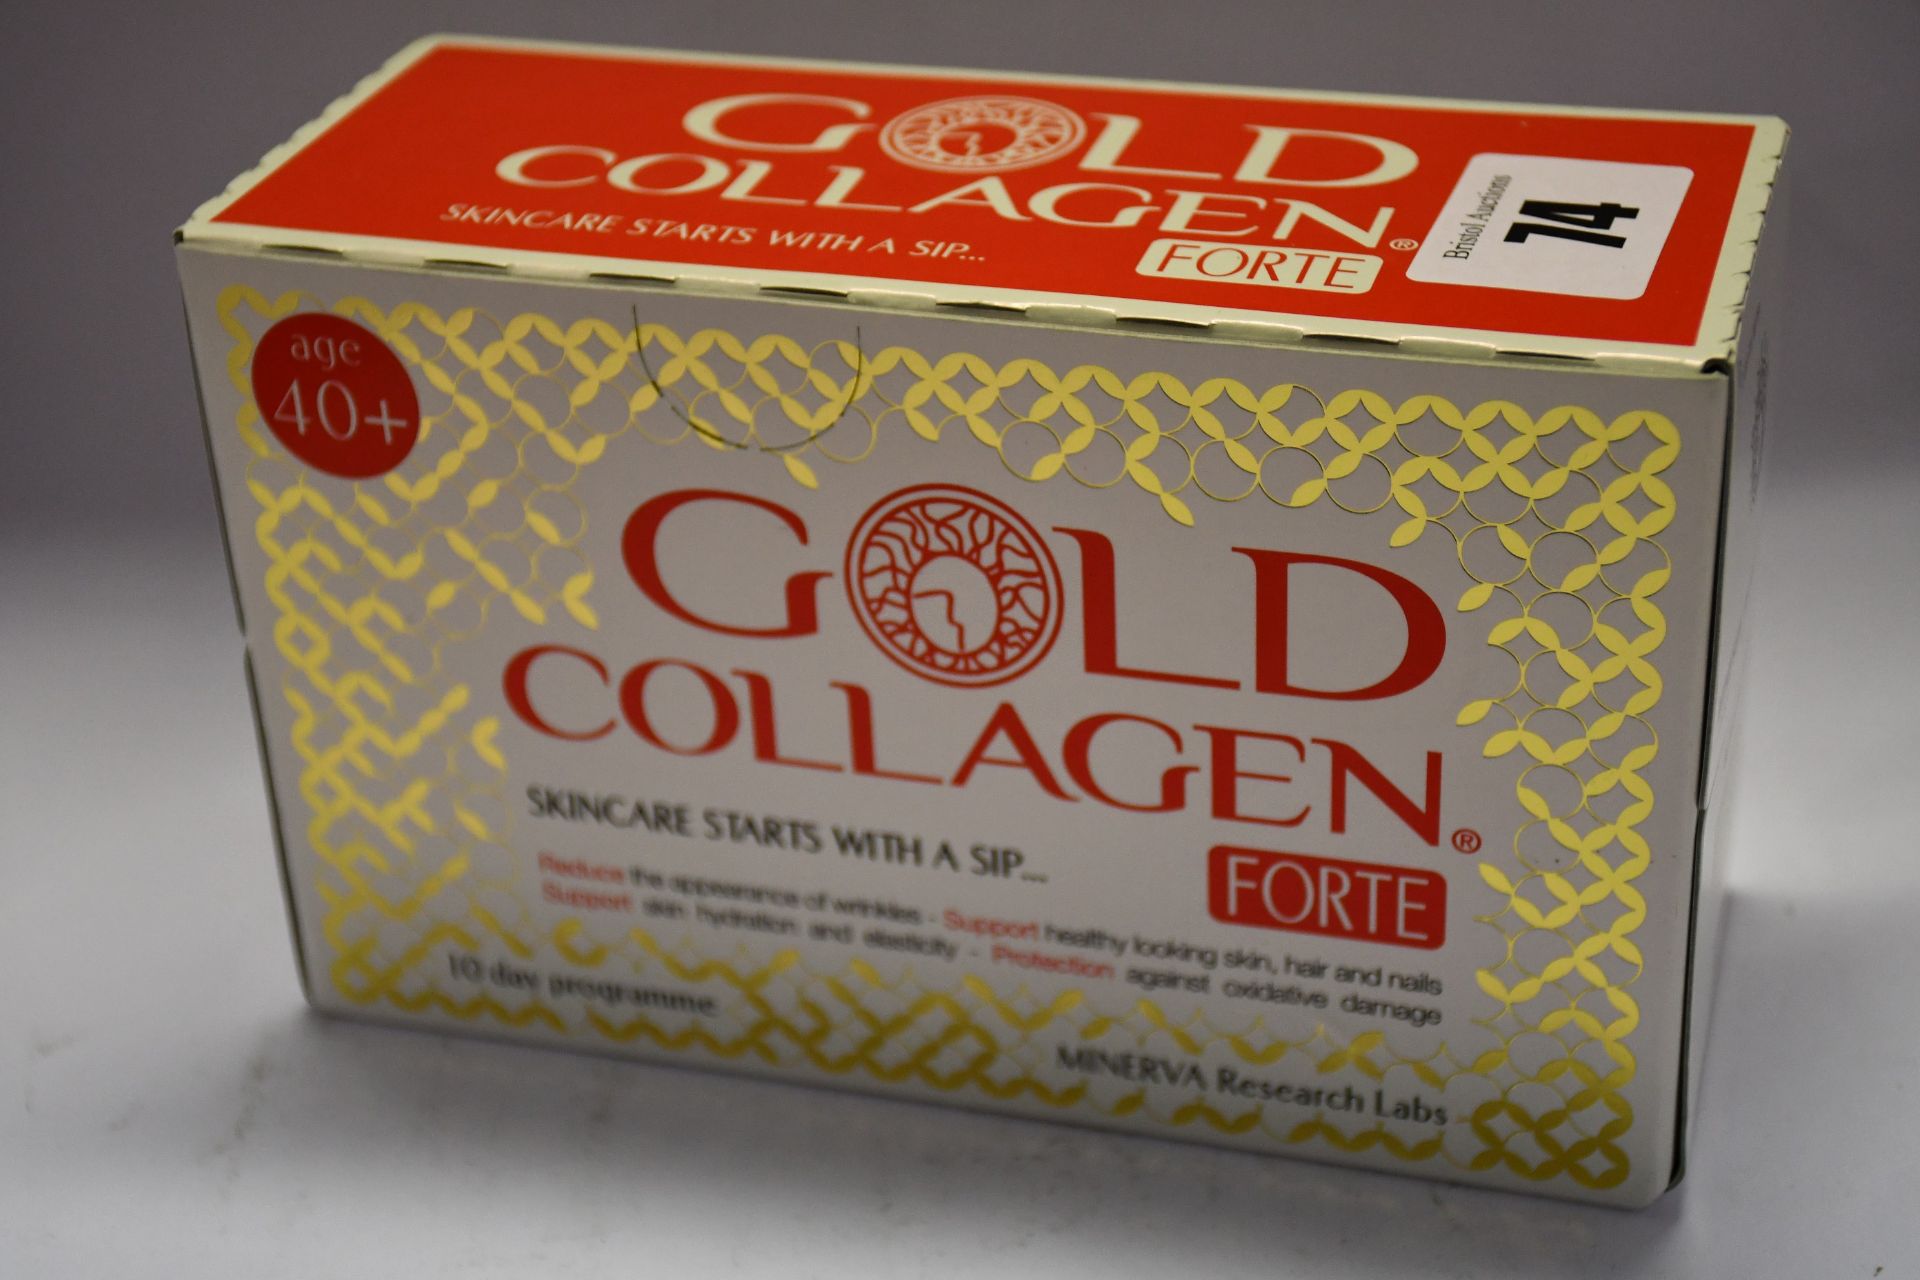 Three as new Gold collagen forte skincare starts with a sip.